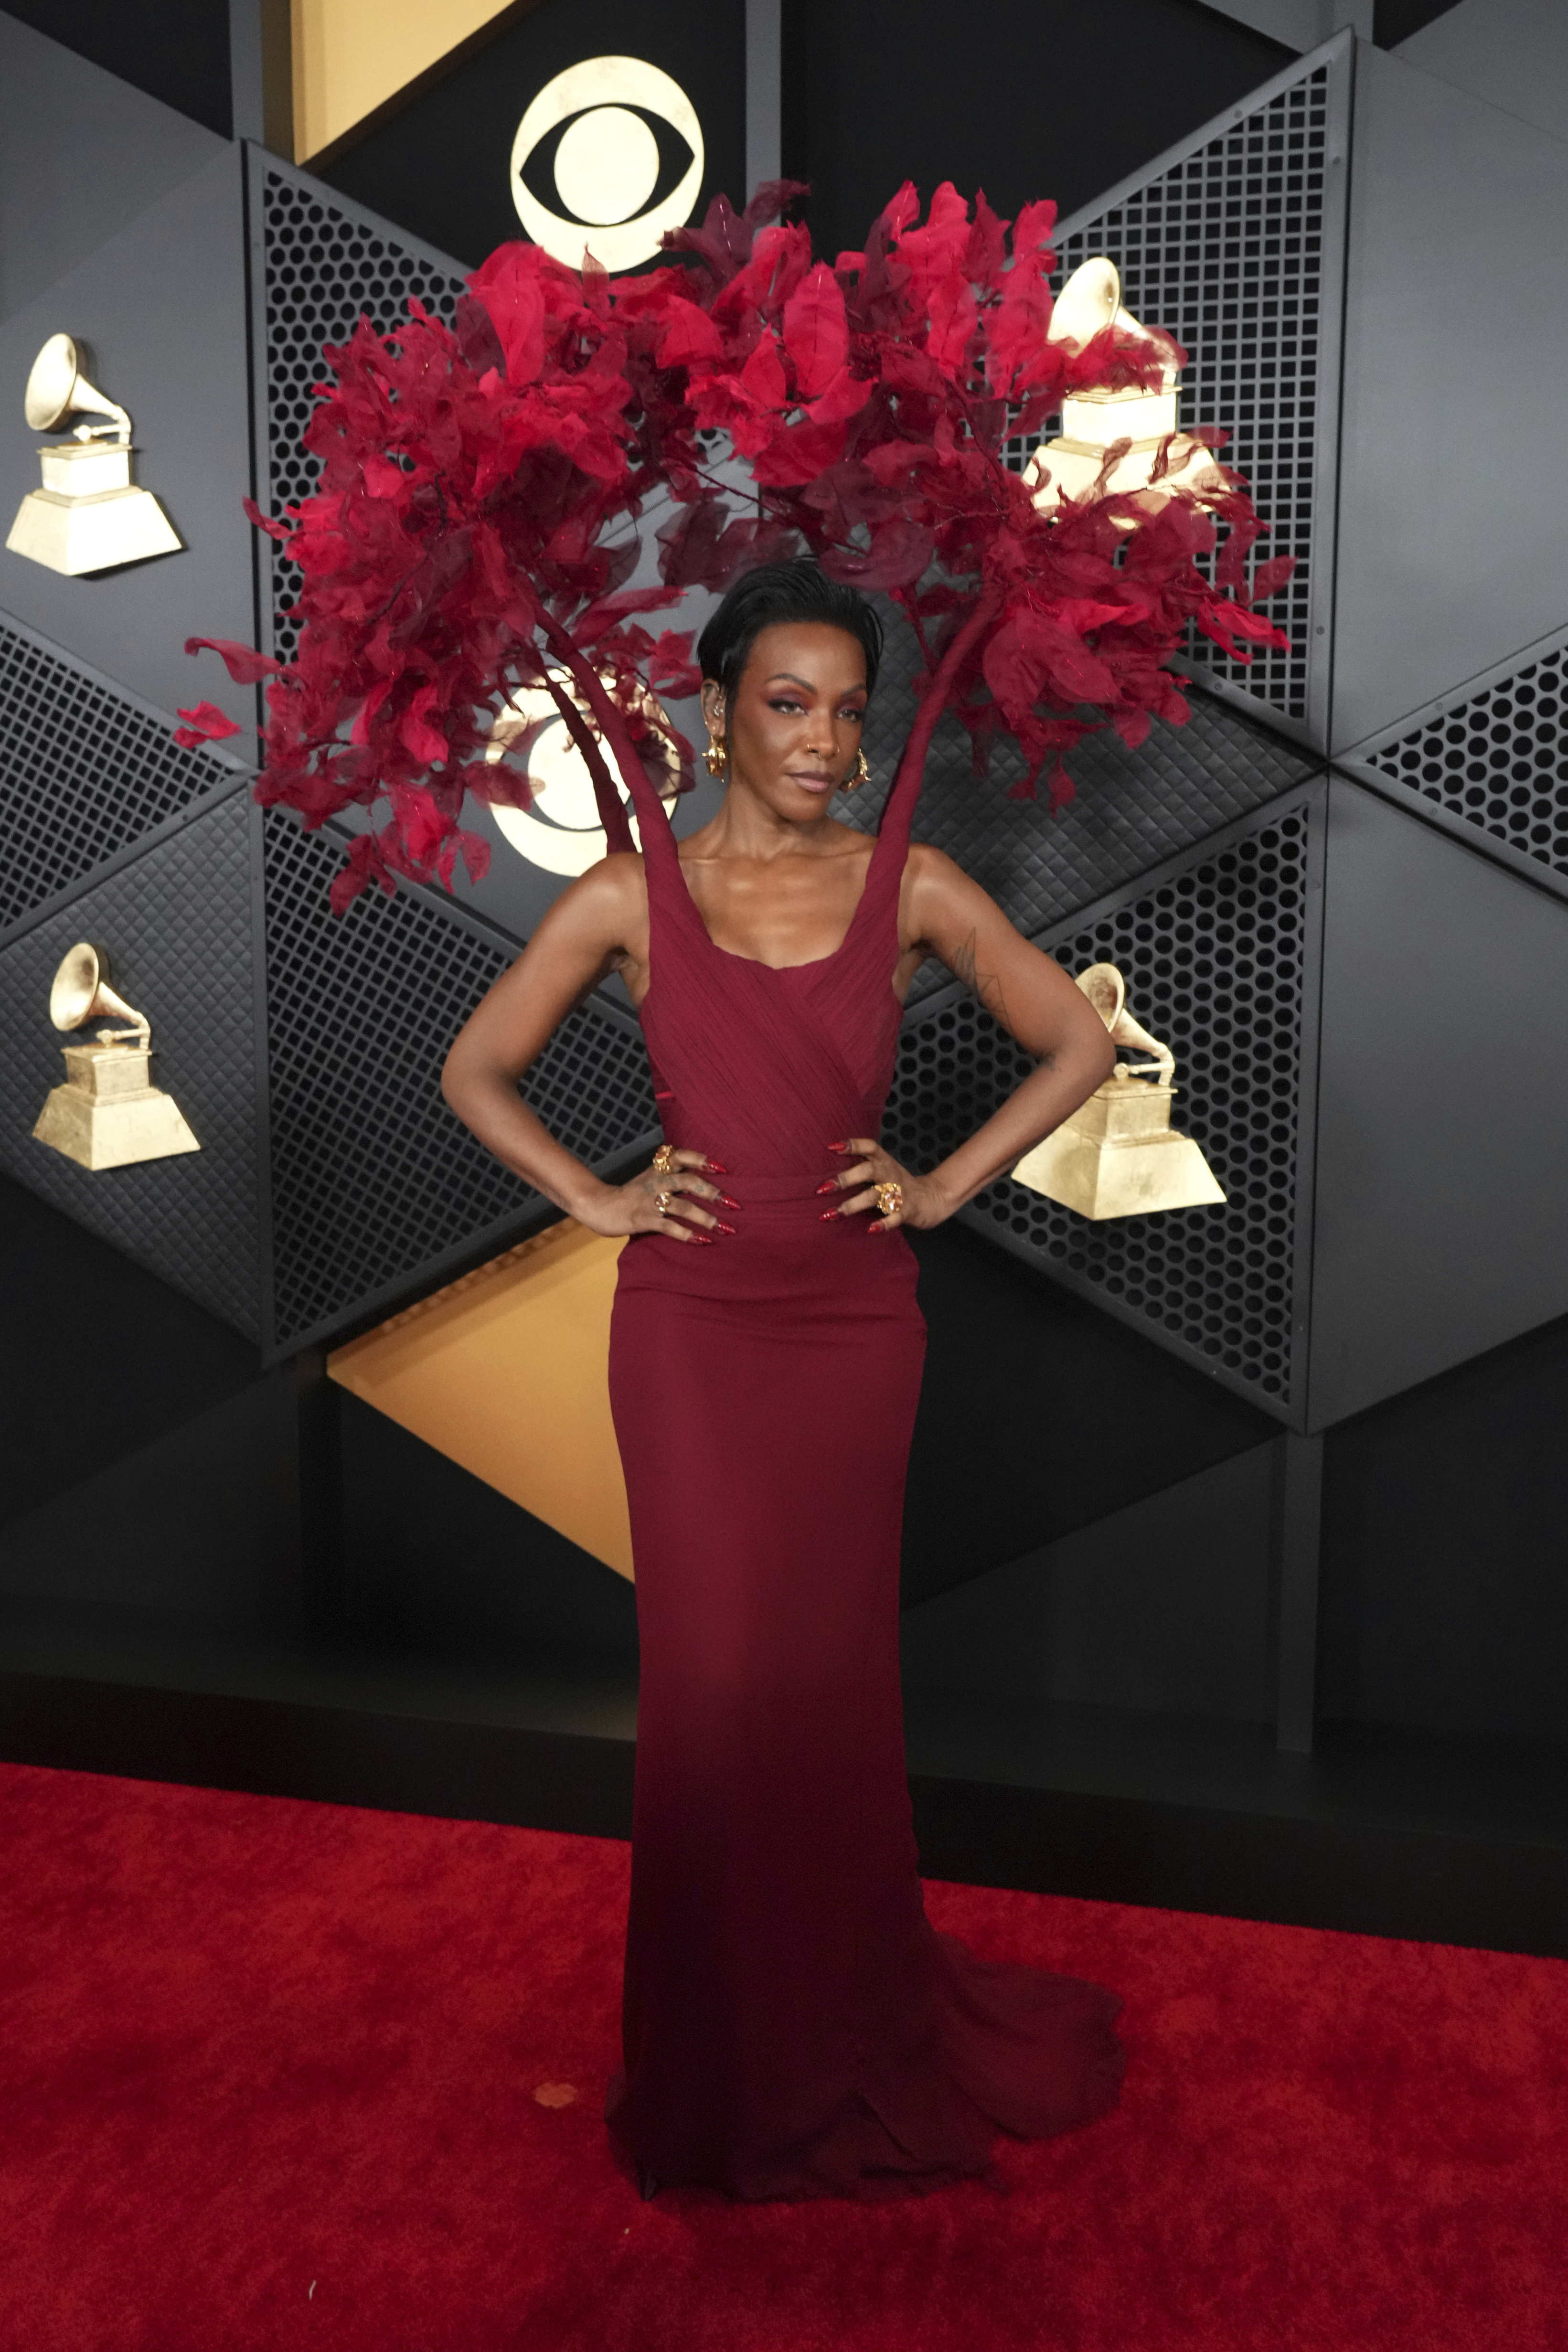 Dawn Richard wearing a fitted maroon dress with an attached headpiece with red feathers peacocking over her head